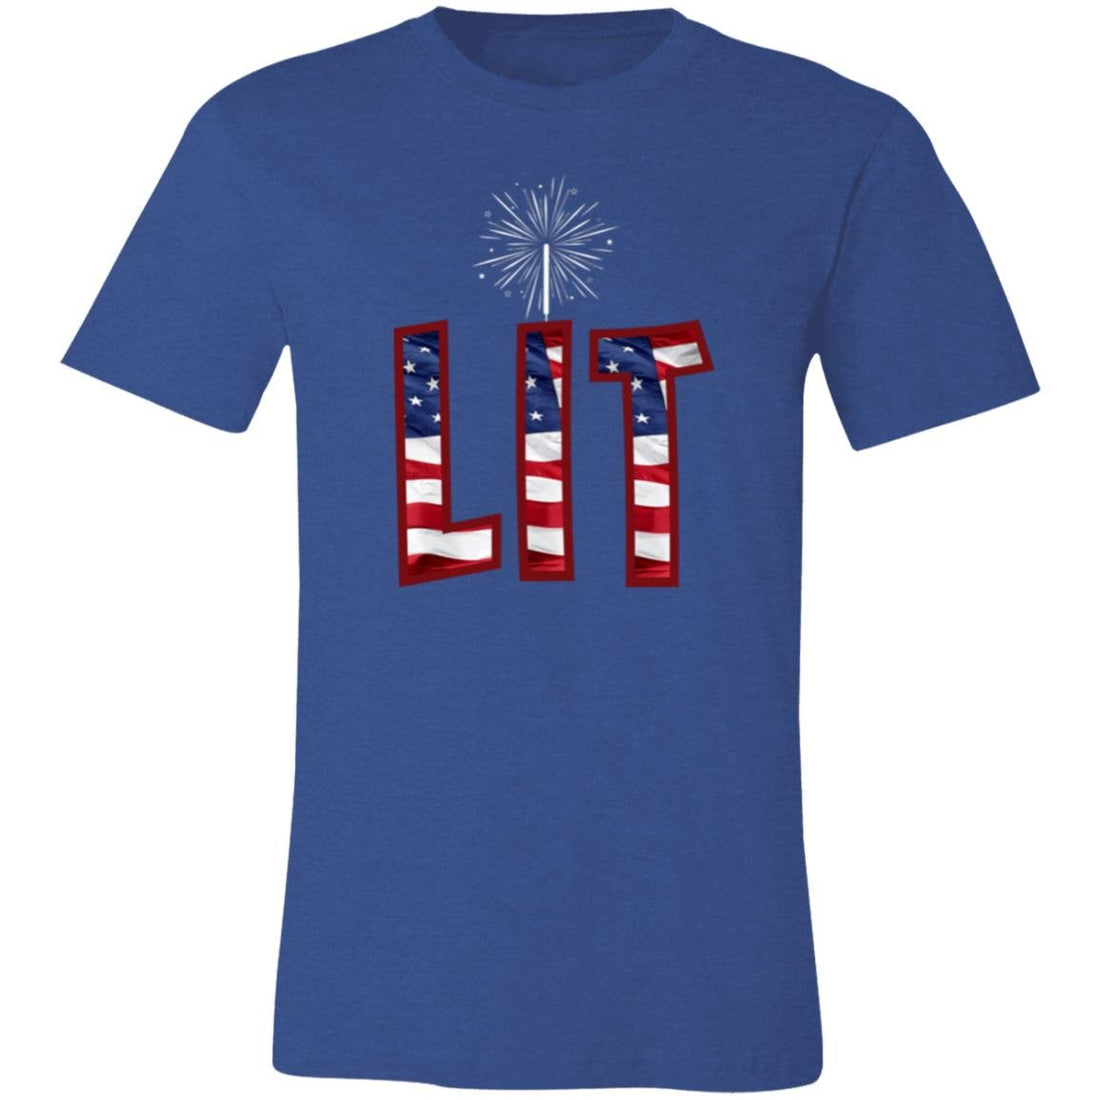 LIT on the 4th T-Shirt - T-Shirts - Positively Sassy - LIT on the 4th T-Shirt